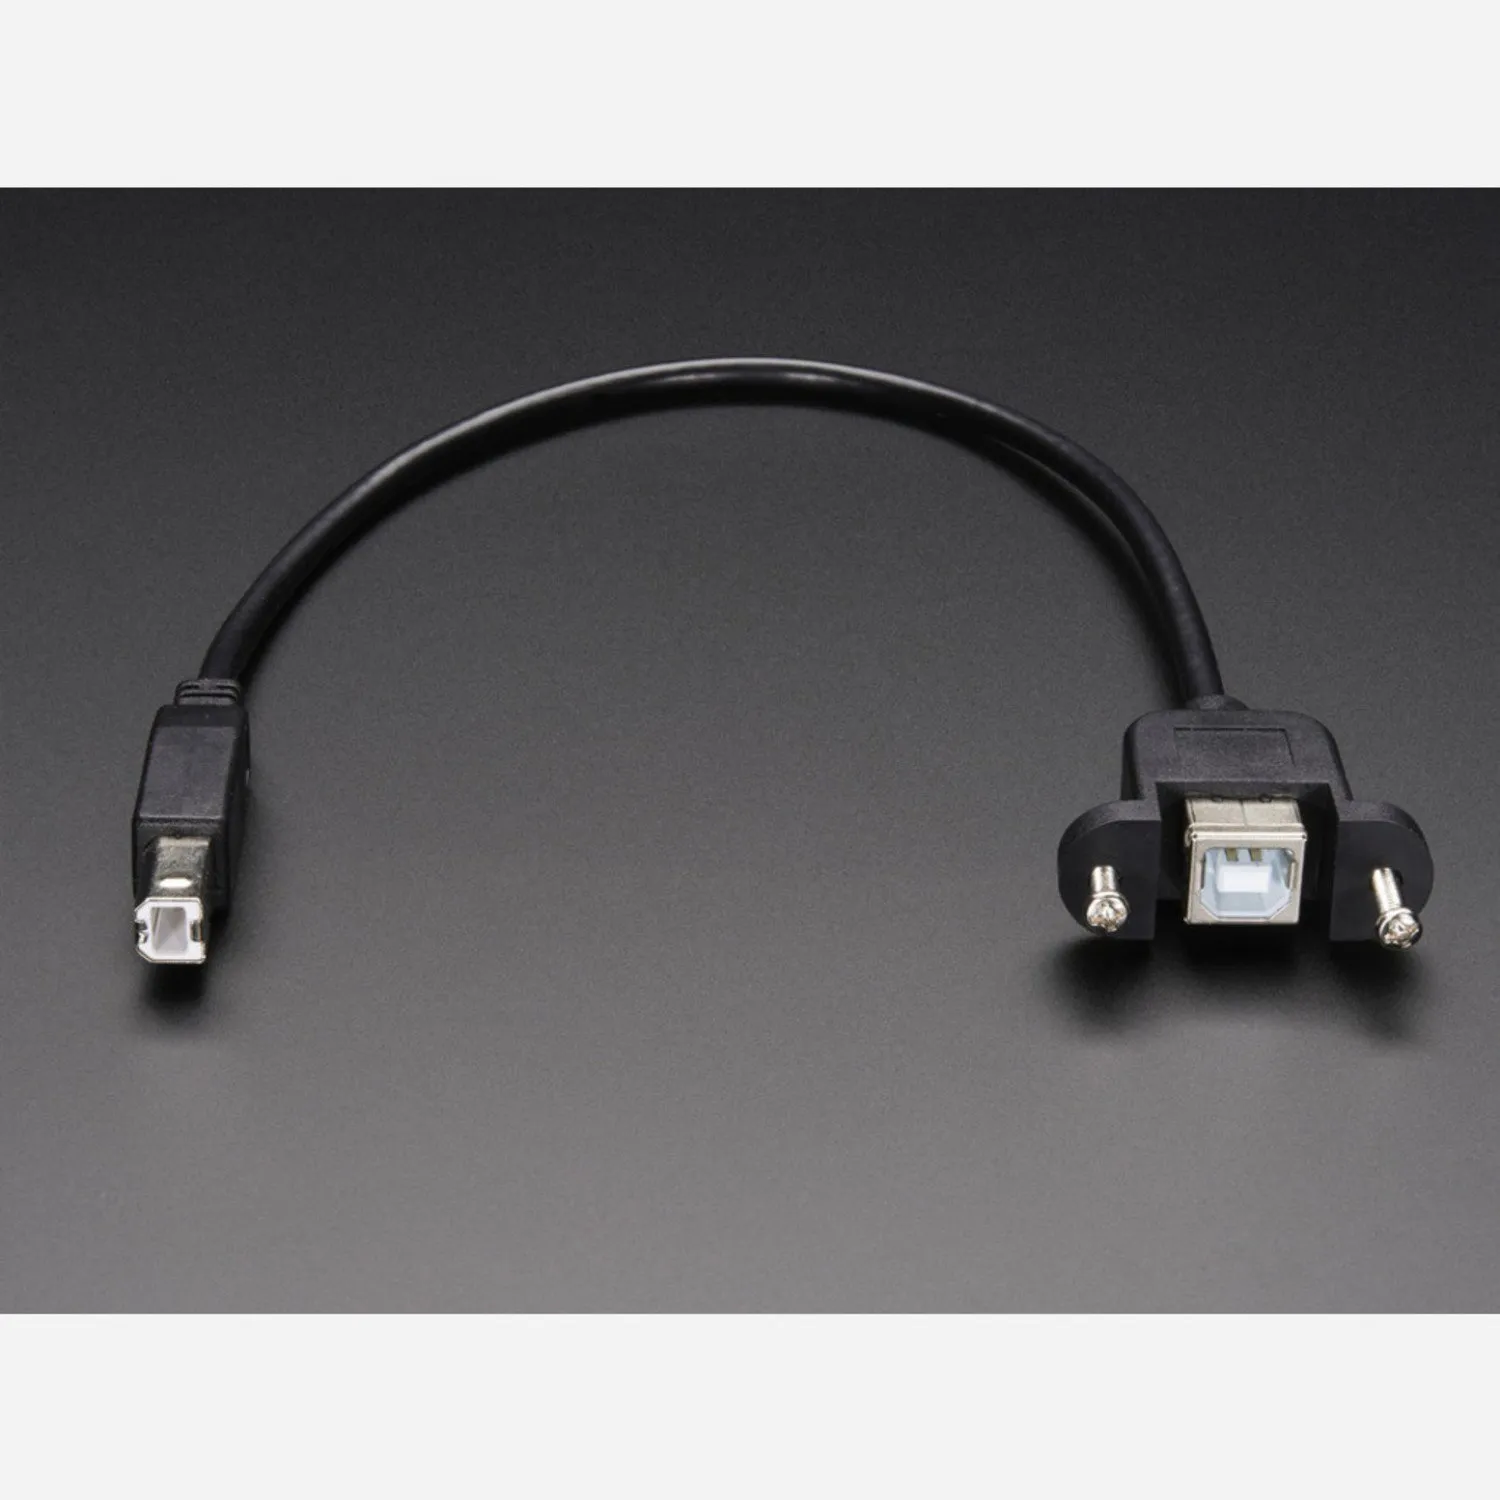 Photo of Panel Mount USB Cable - B Male to B Female